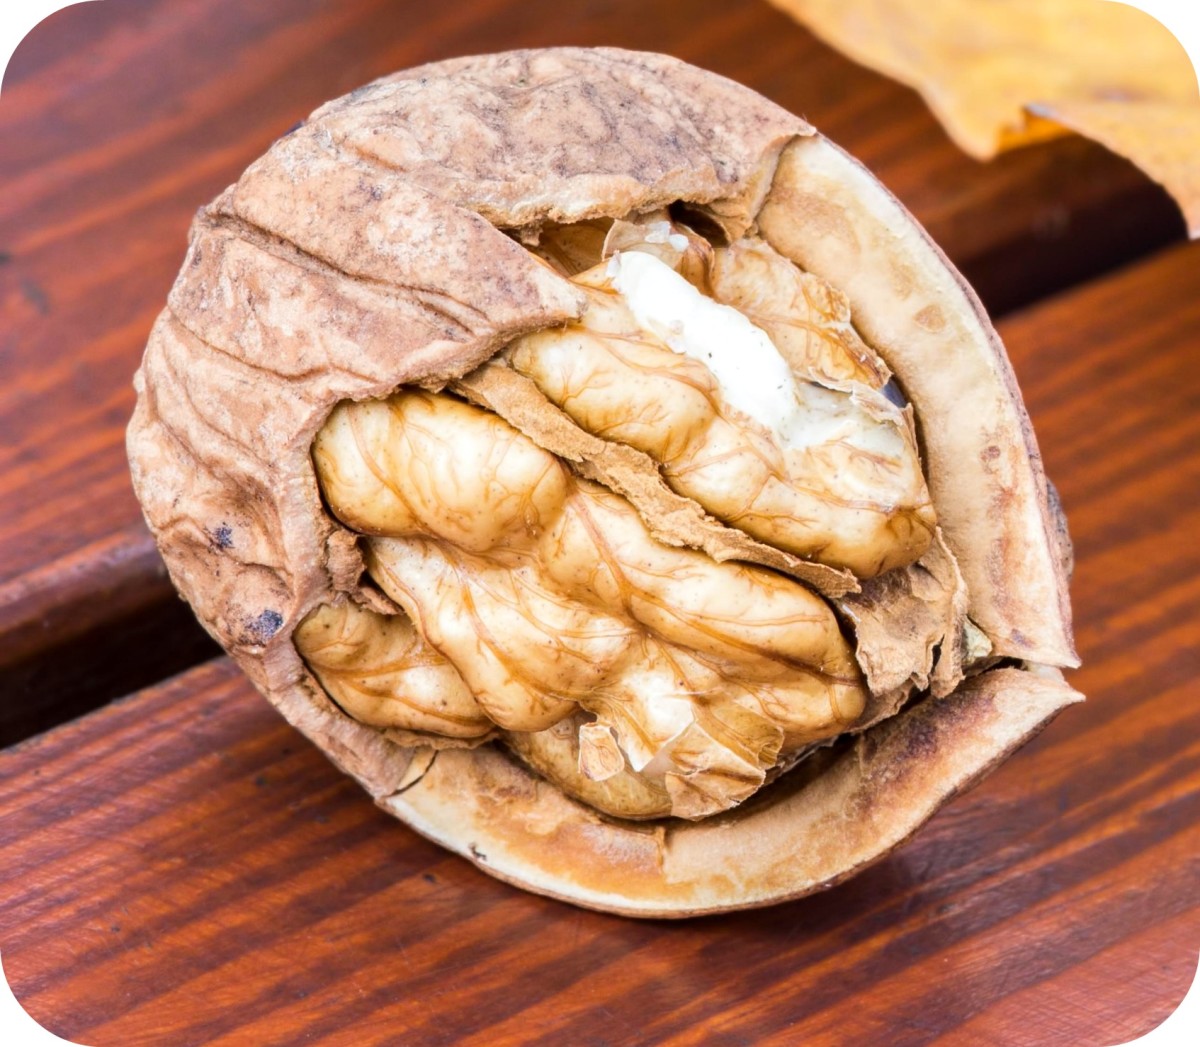 Walnuts are the ultimate nut, rich in omega 3 fatty acids, great for beautiful skin.